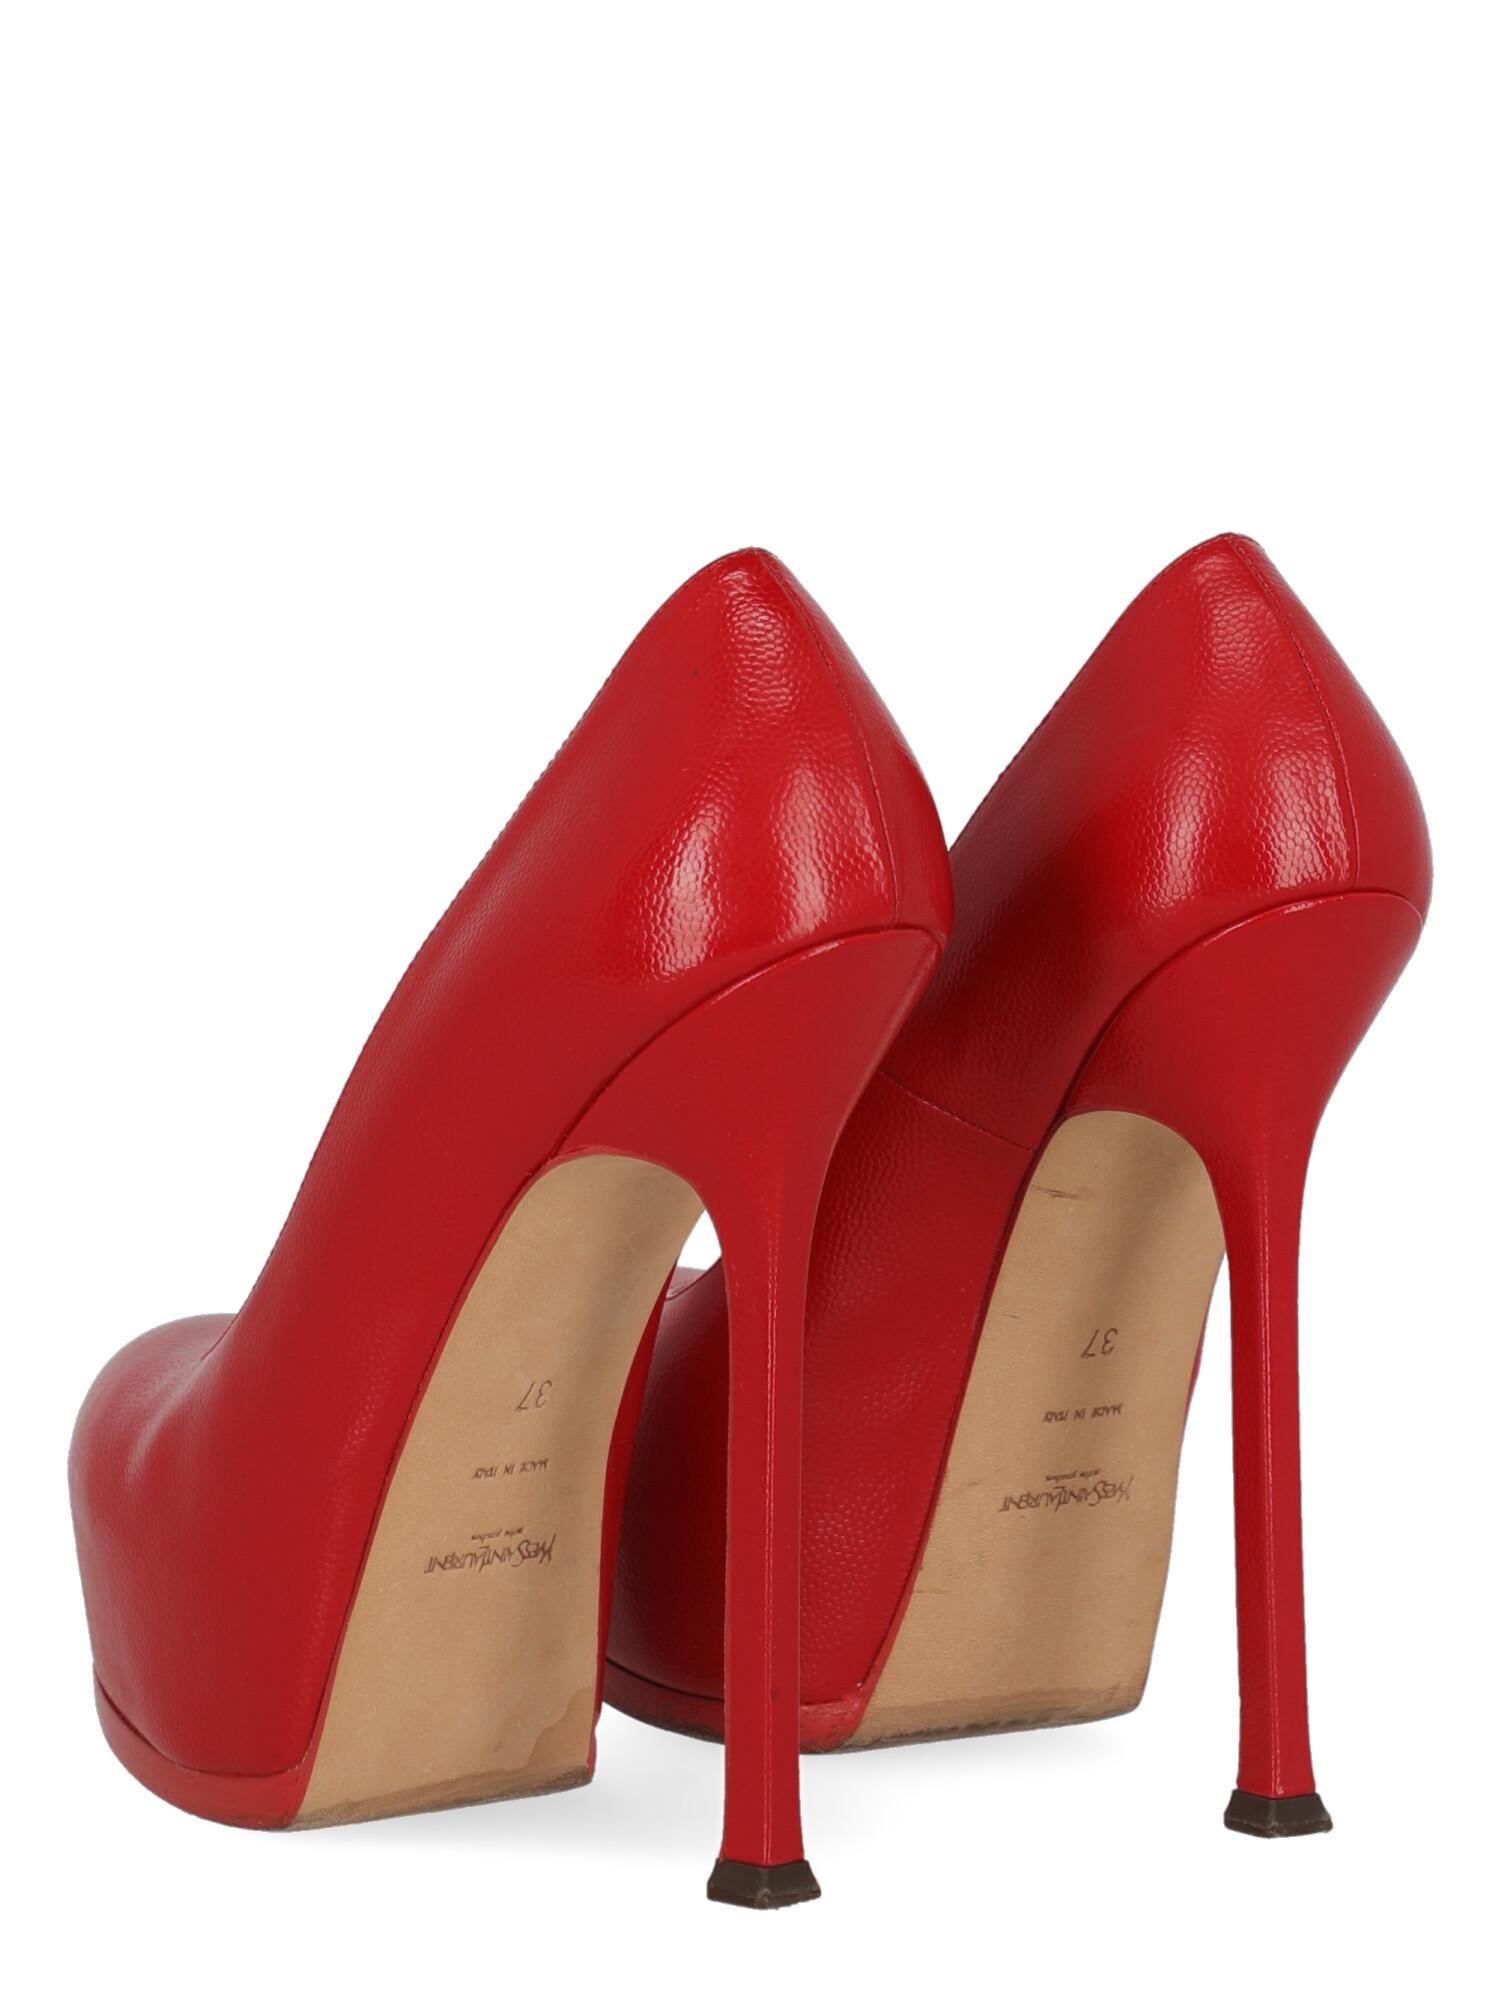 Saint Laurent Women Pumps Red Leather EU 37 In Good Condition For Sale In Milan, IT